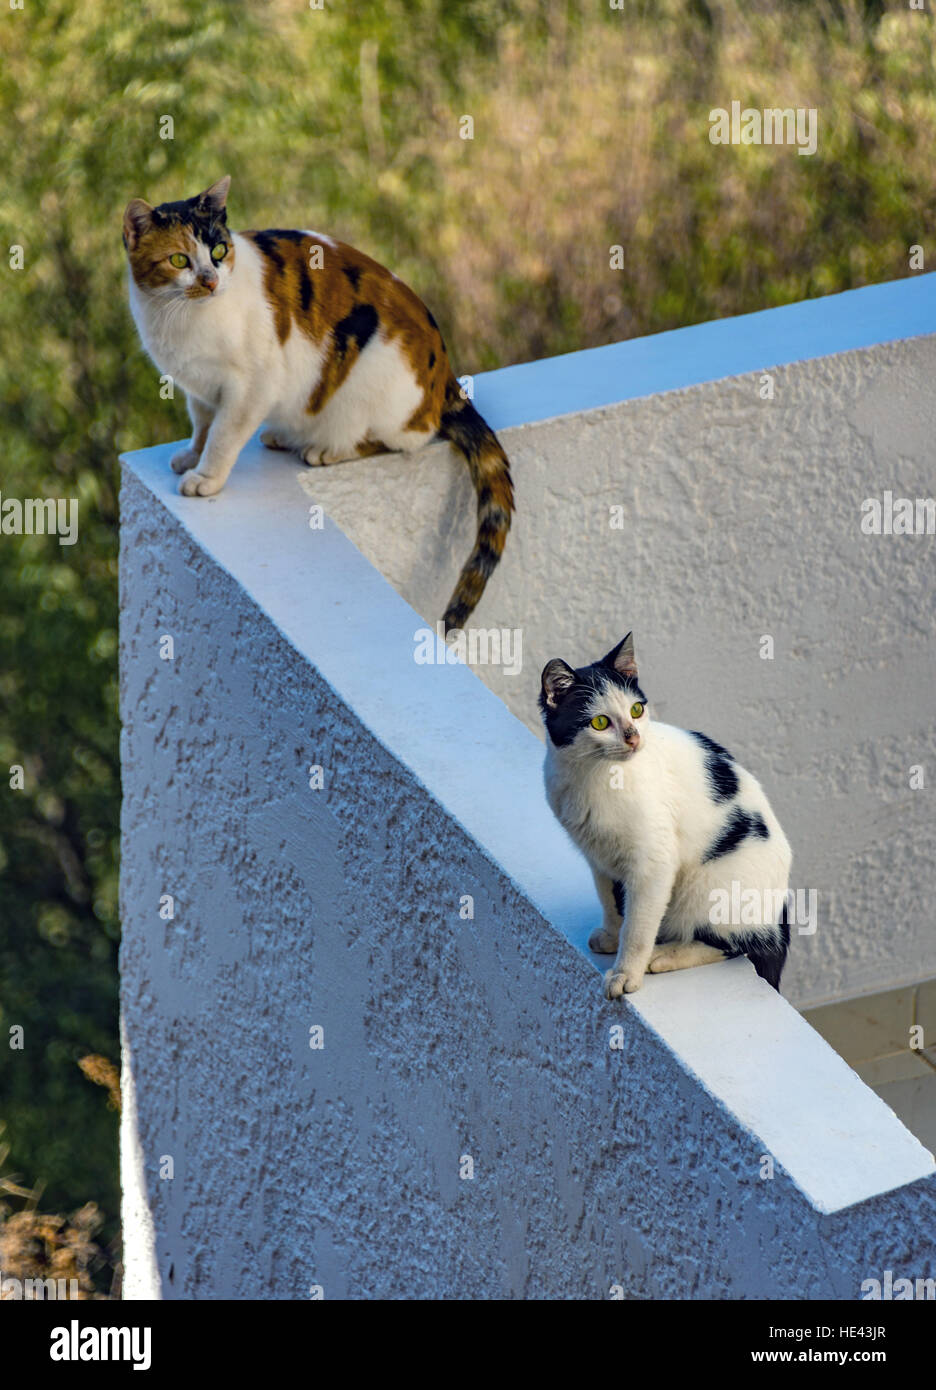 Two feral cats sat on a blue wall watching something off camera Stock Photo